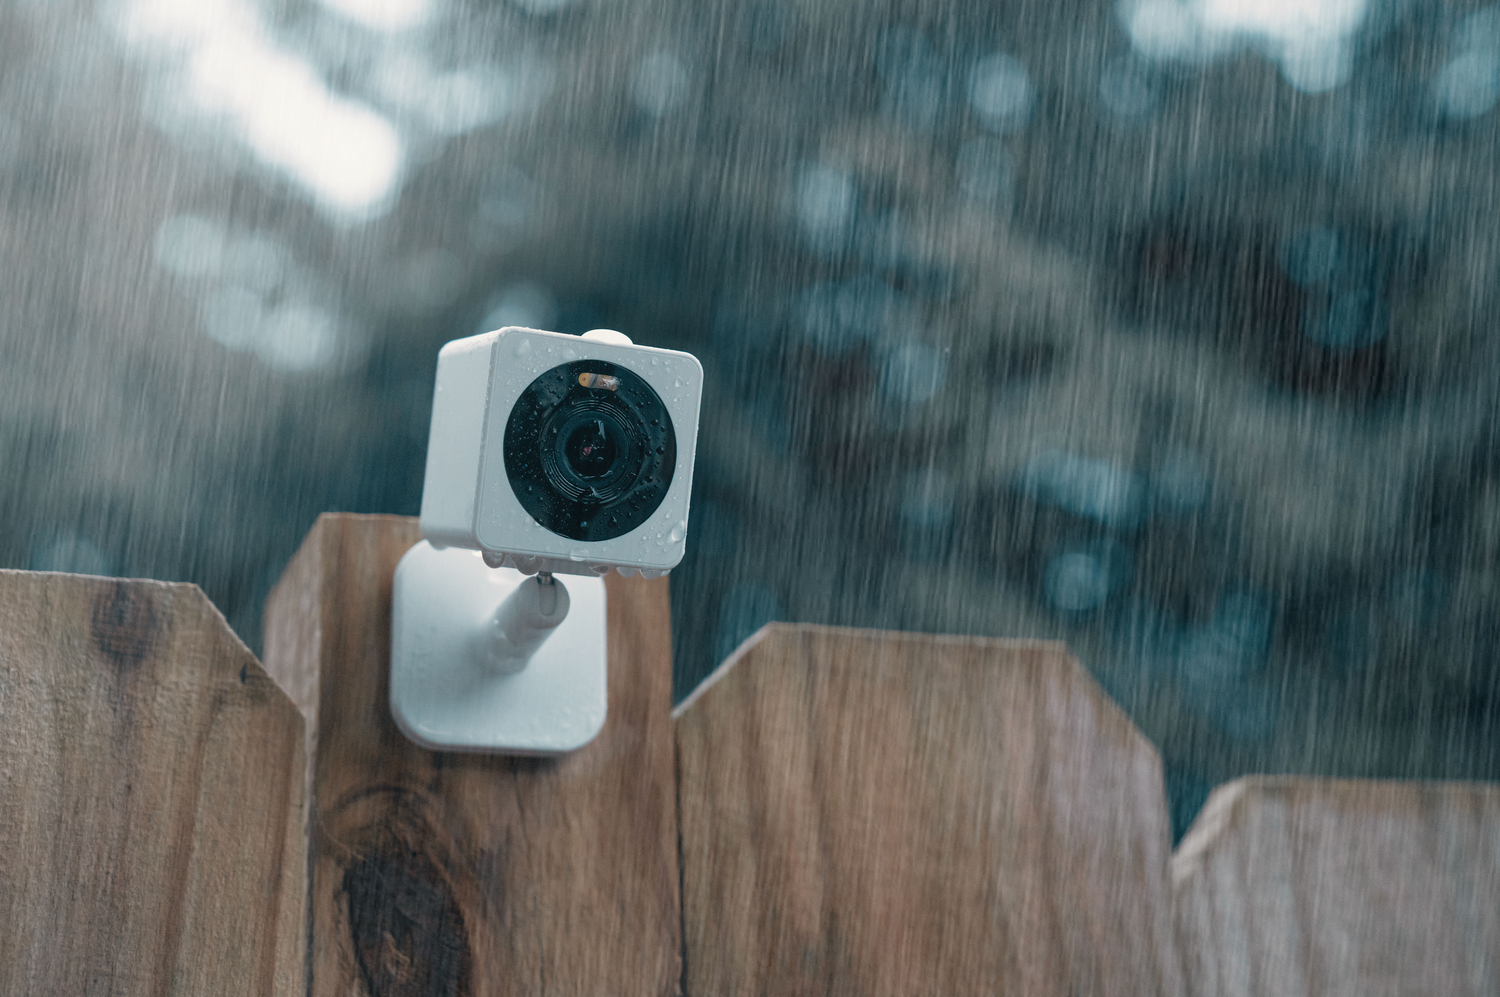 Rain falling onto a outdoor security camera mounted to a fence post